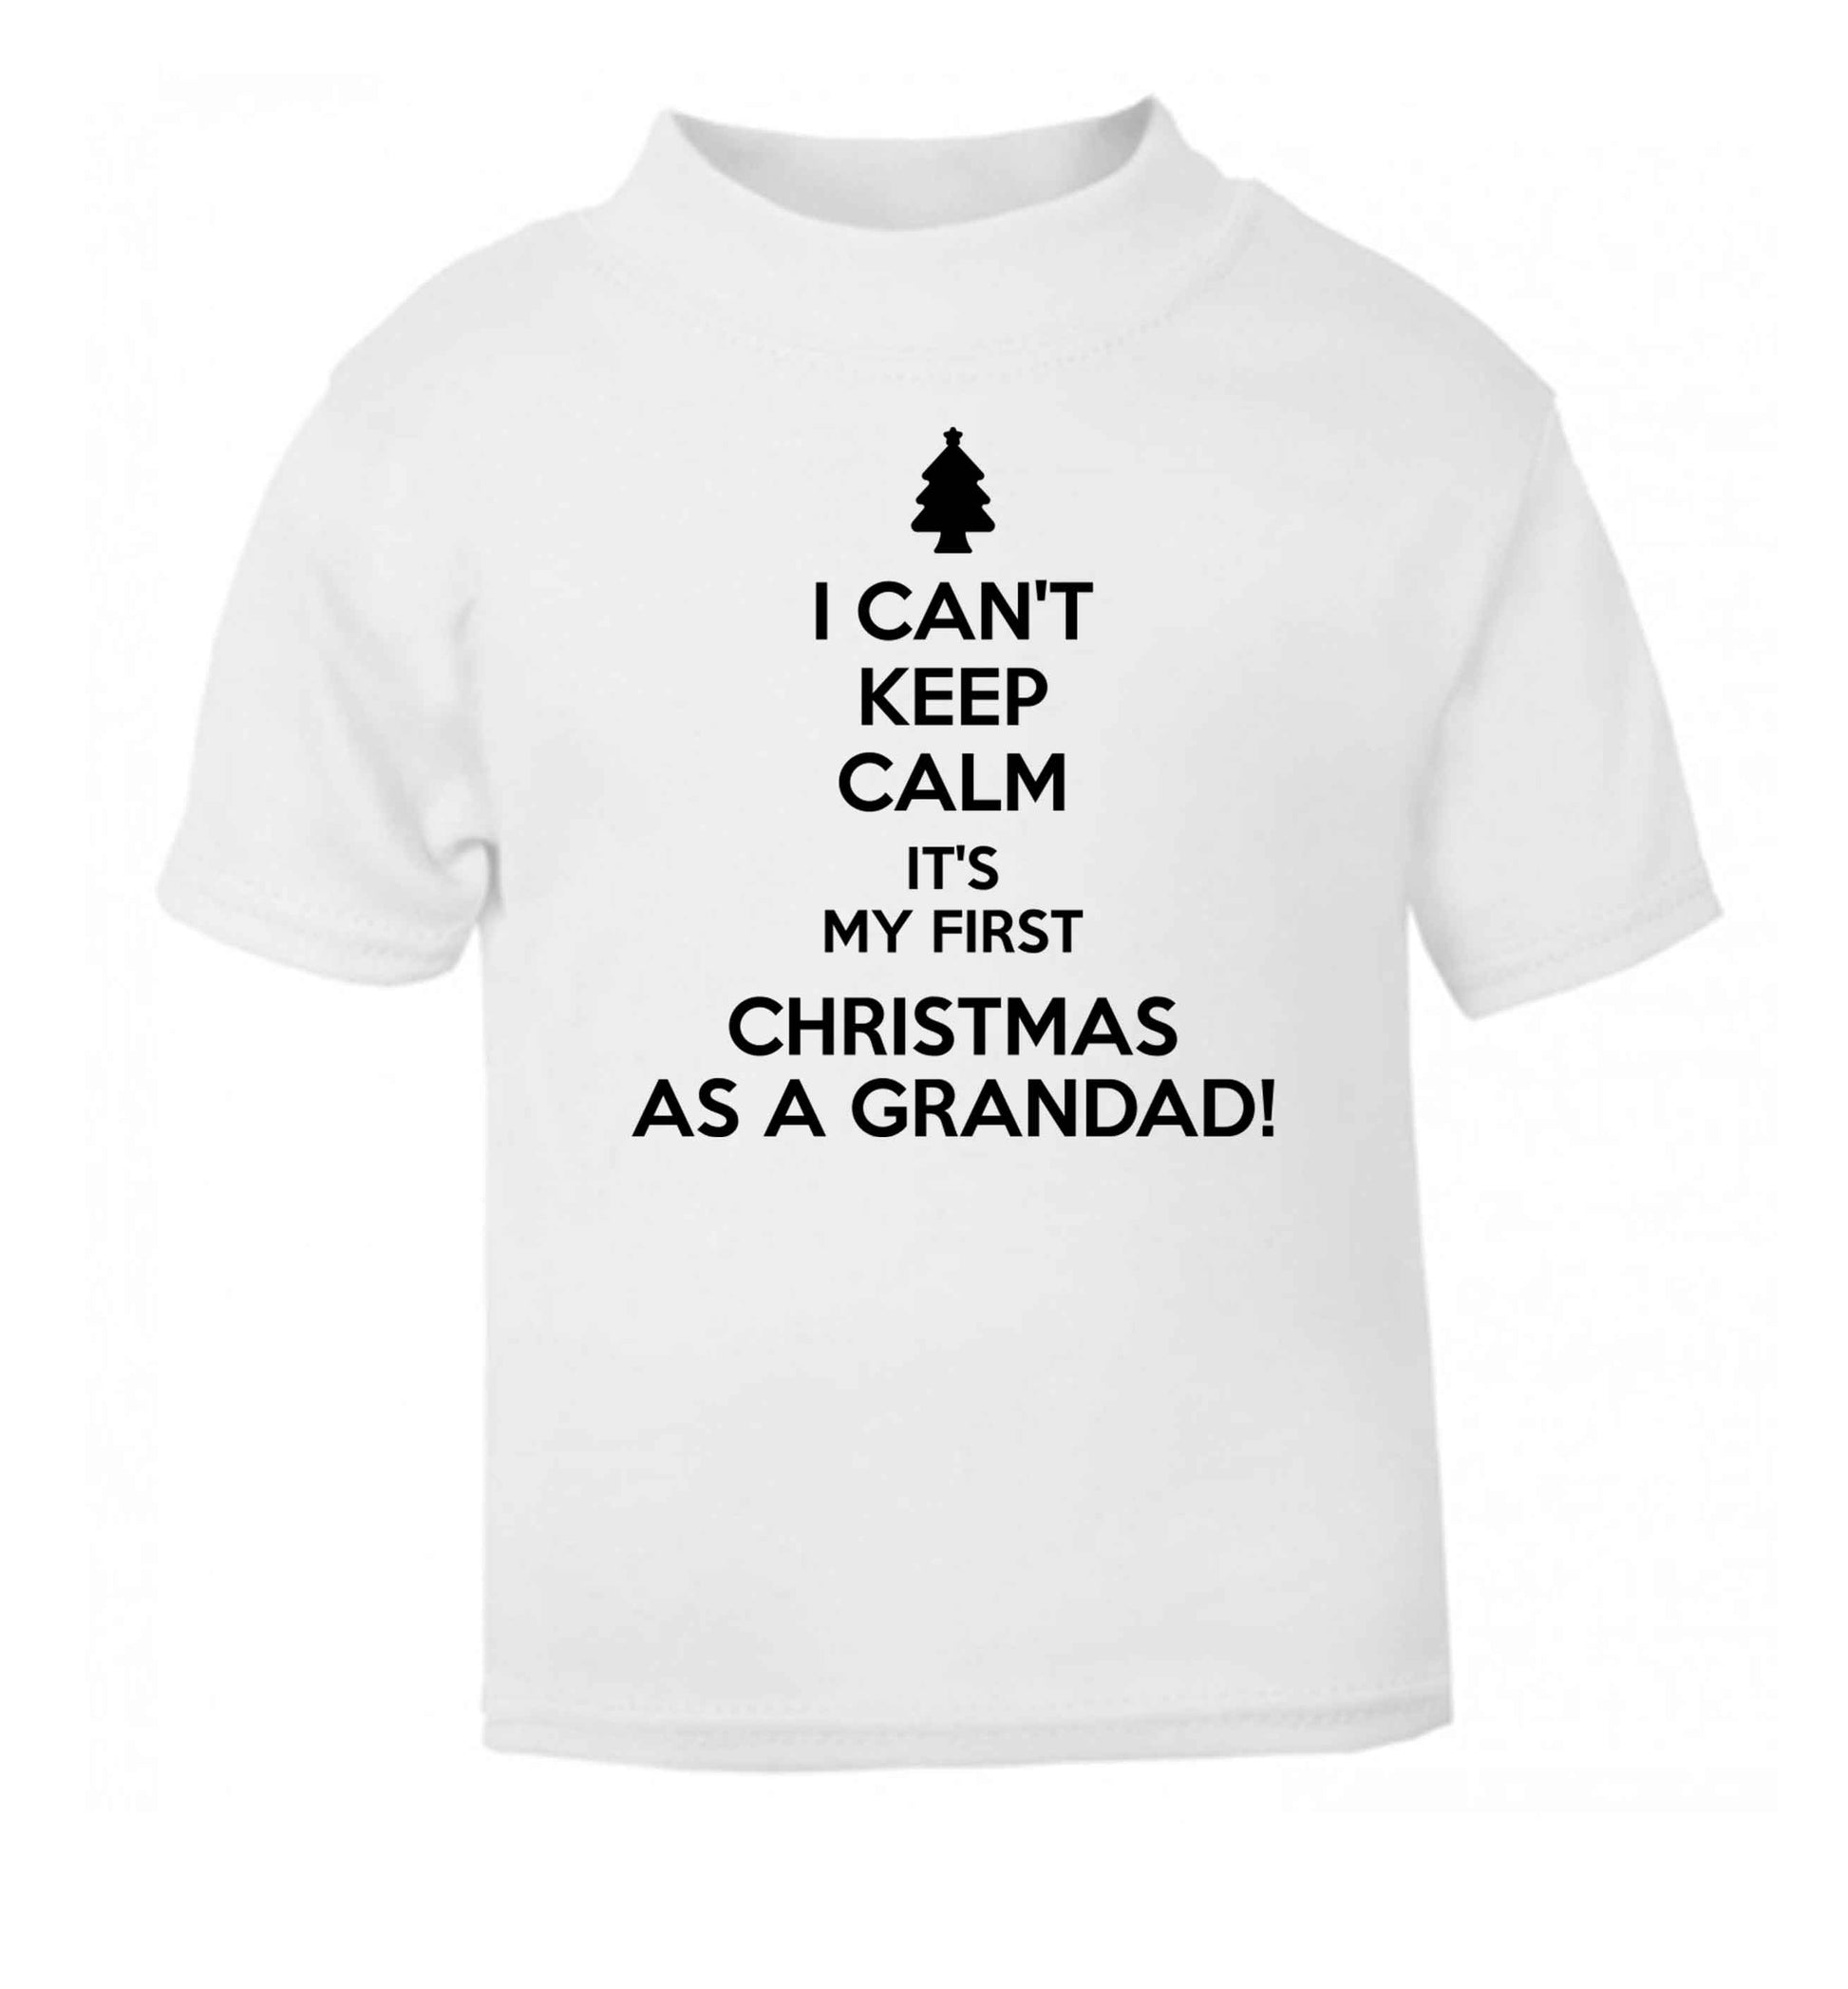 I can't keep calm it's my first Christmas as a grandad! white Baby Toddler Tshirt 2 Years